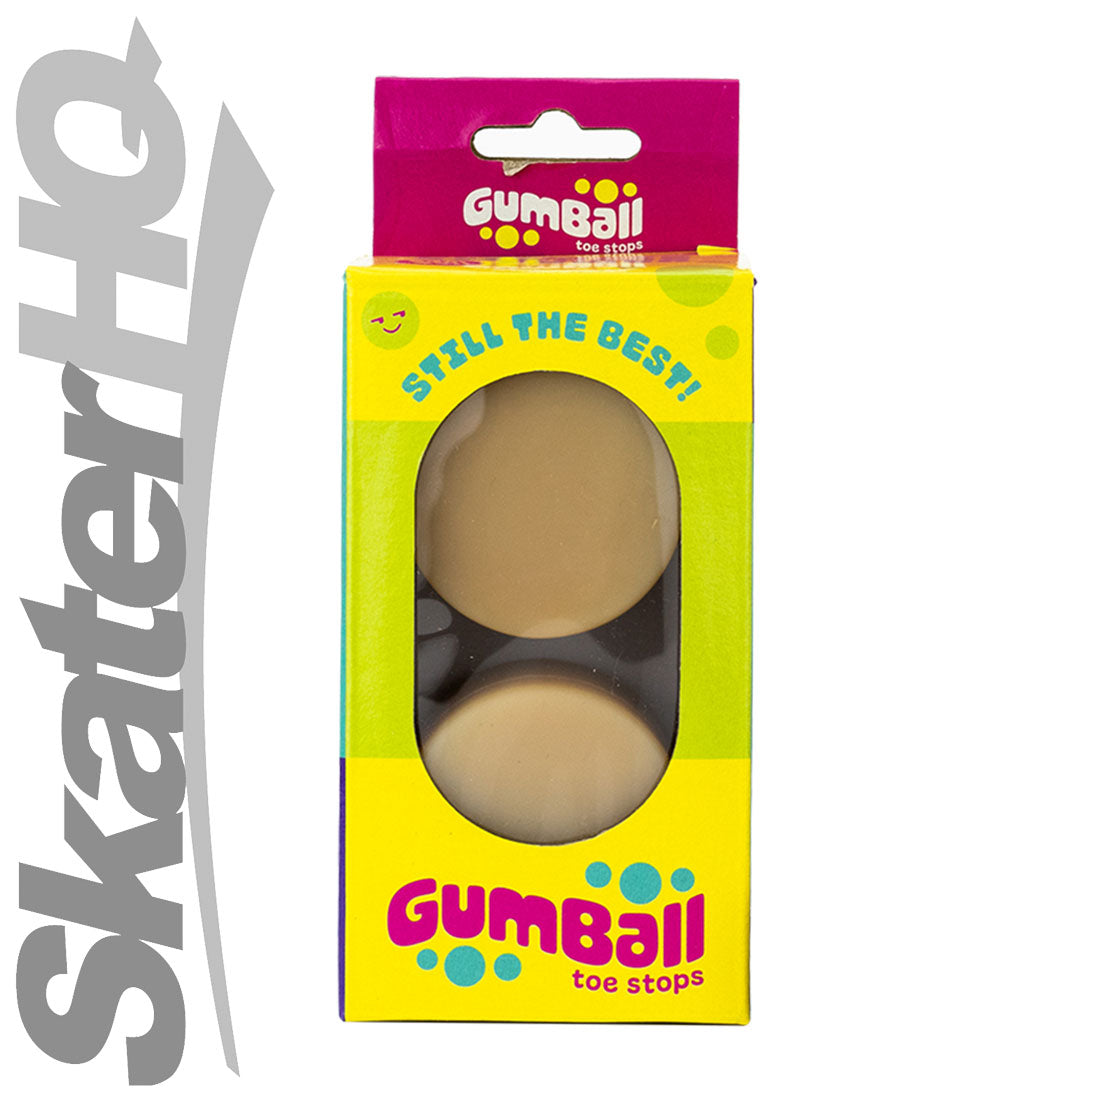 Gumball Toe Stops - Short Stem - Natural 75A Roller Skate Hardware and Parts